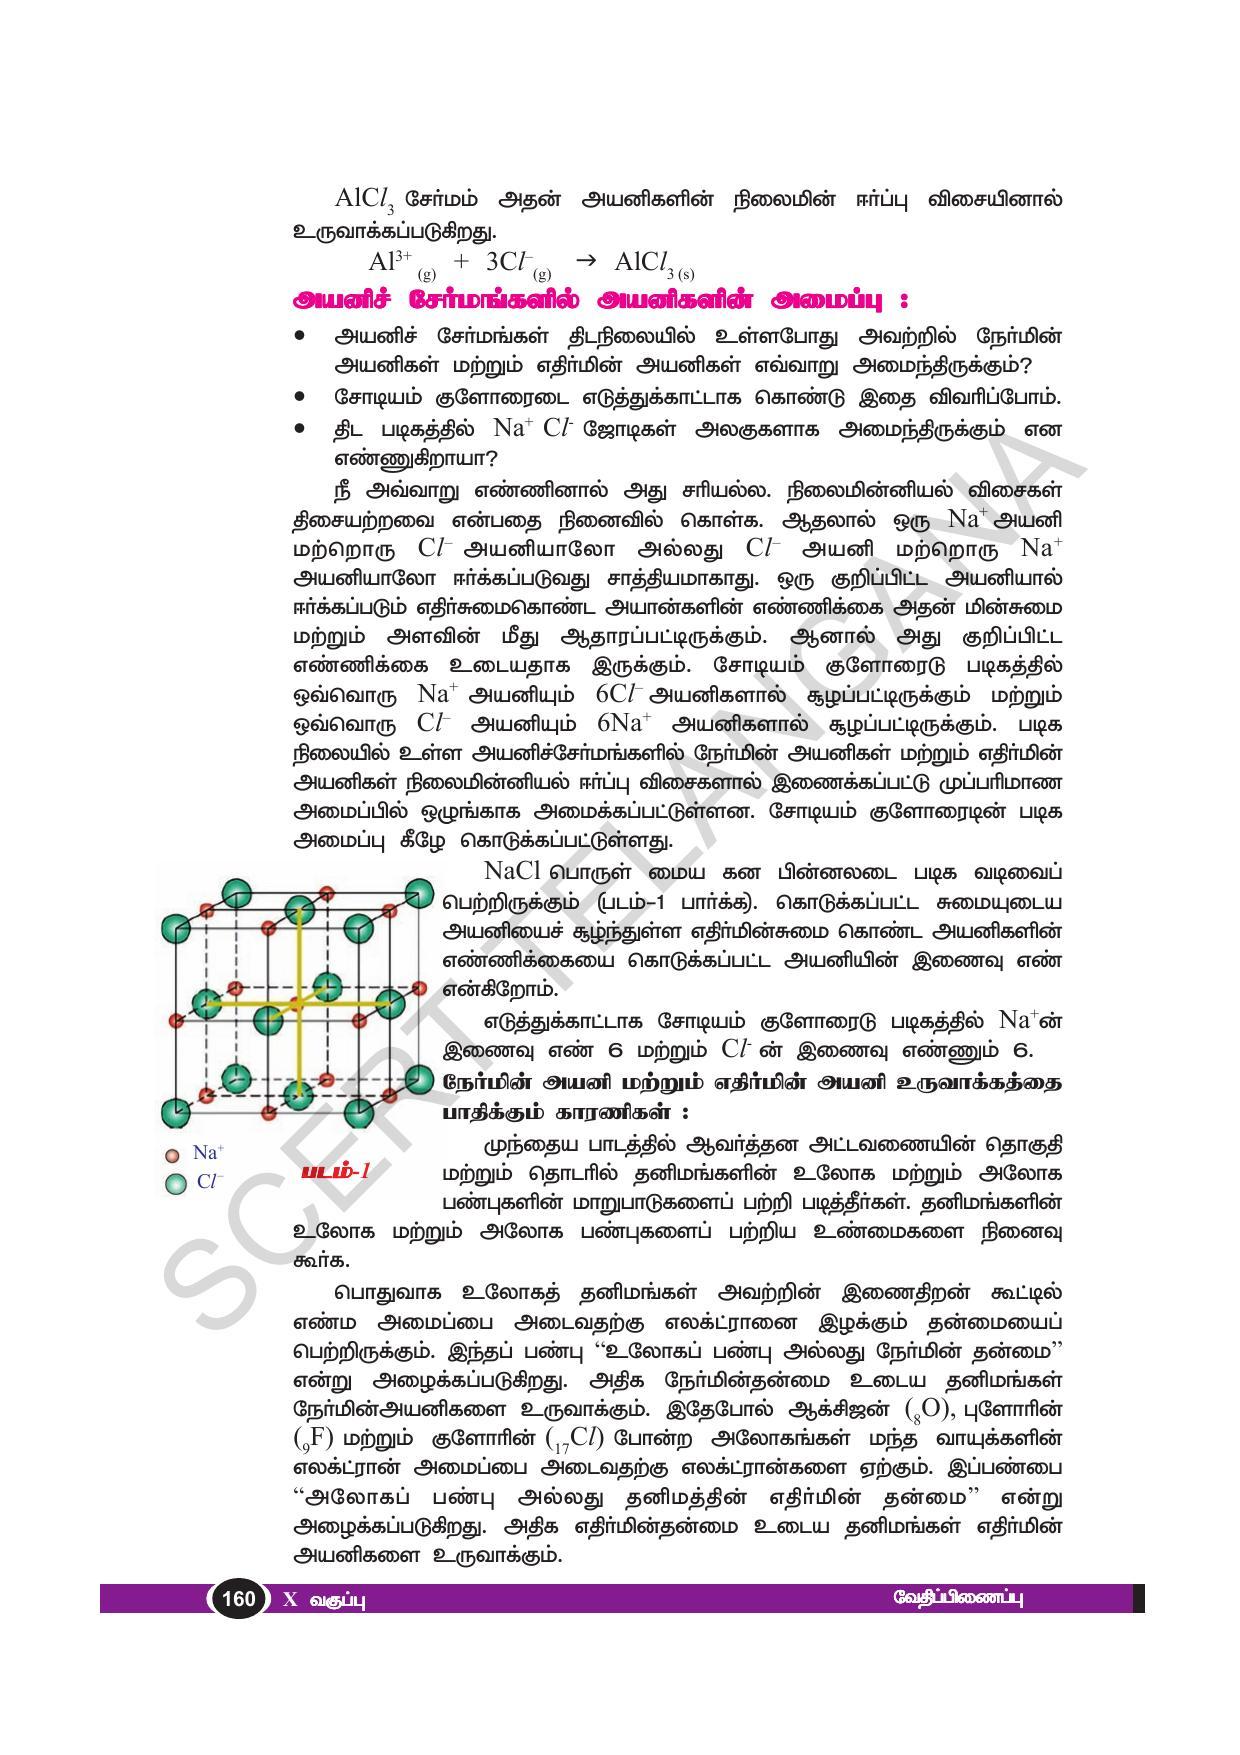 TS SCERT Class 10 Physical Science(Tamil Medium) Text Book - Page 172